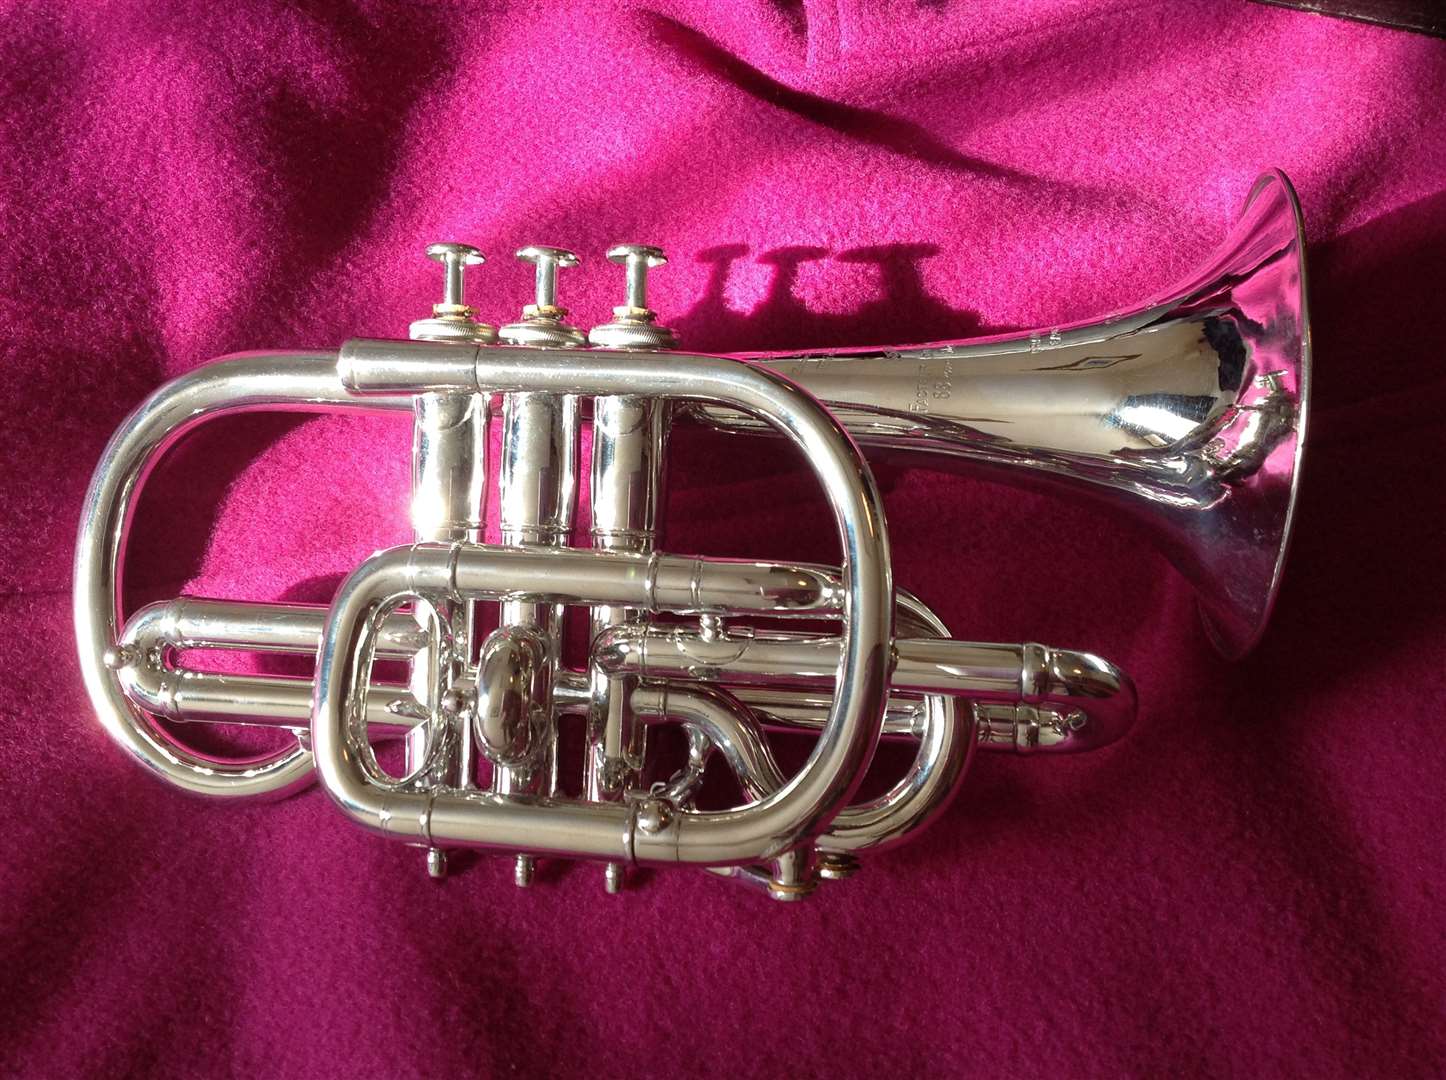 The silver cornet donated in memory of Peggy and Geoffrey Frost